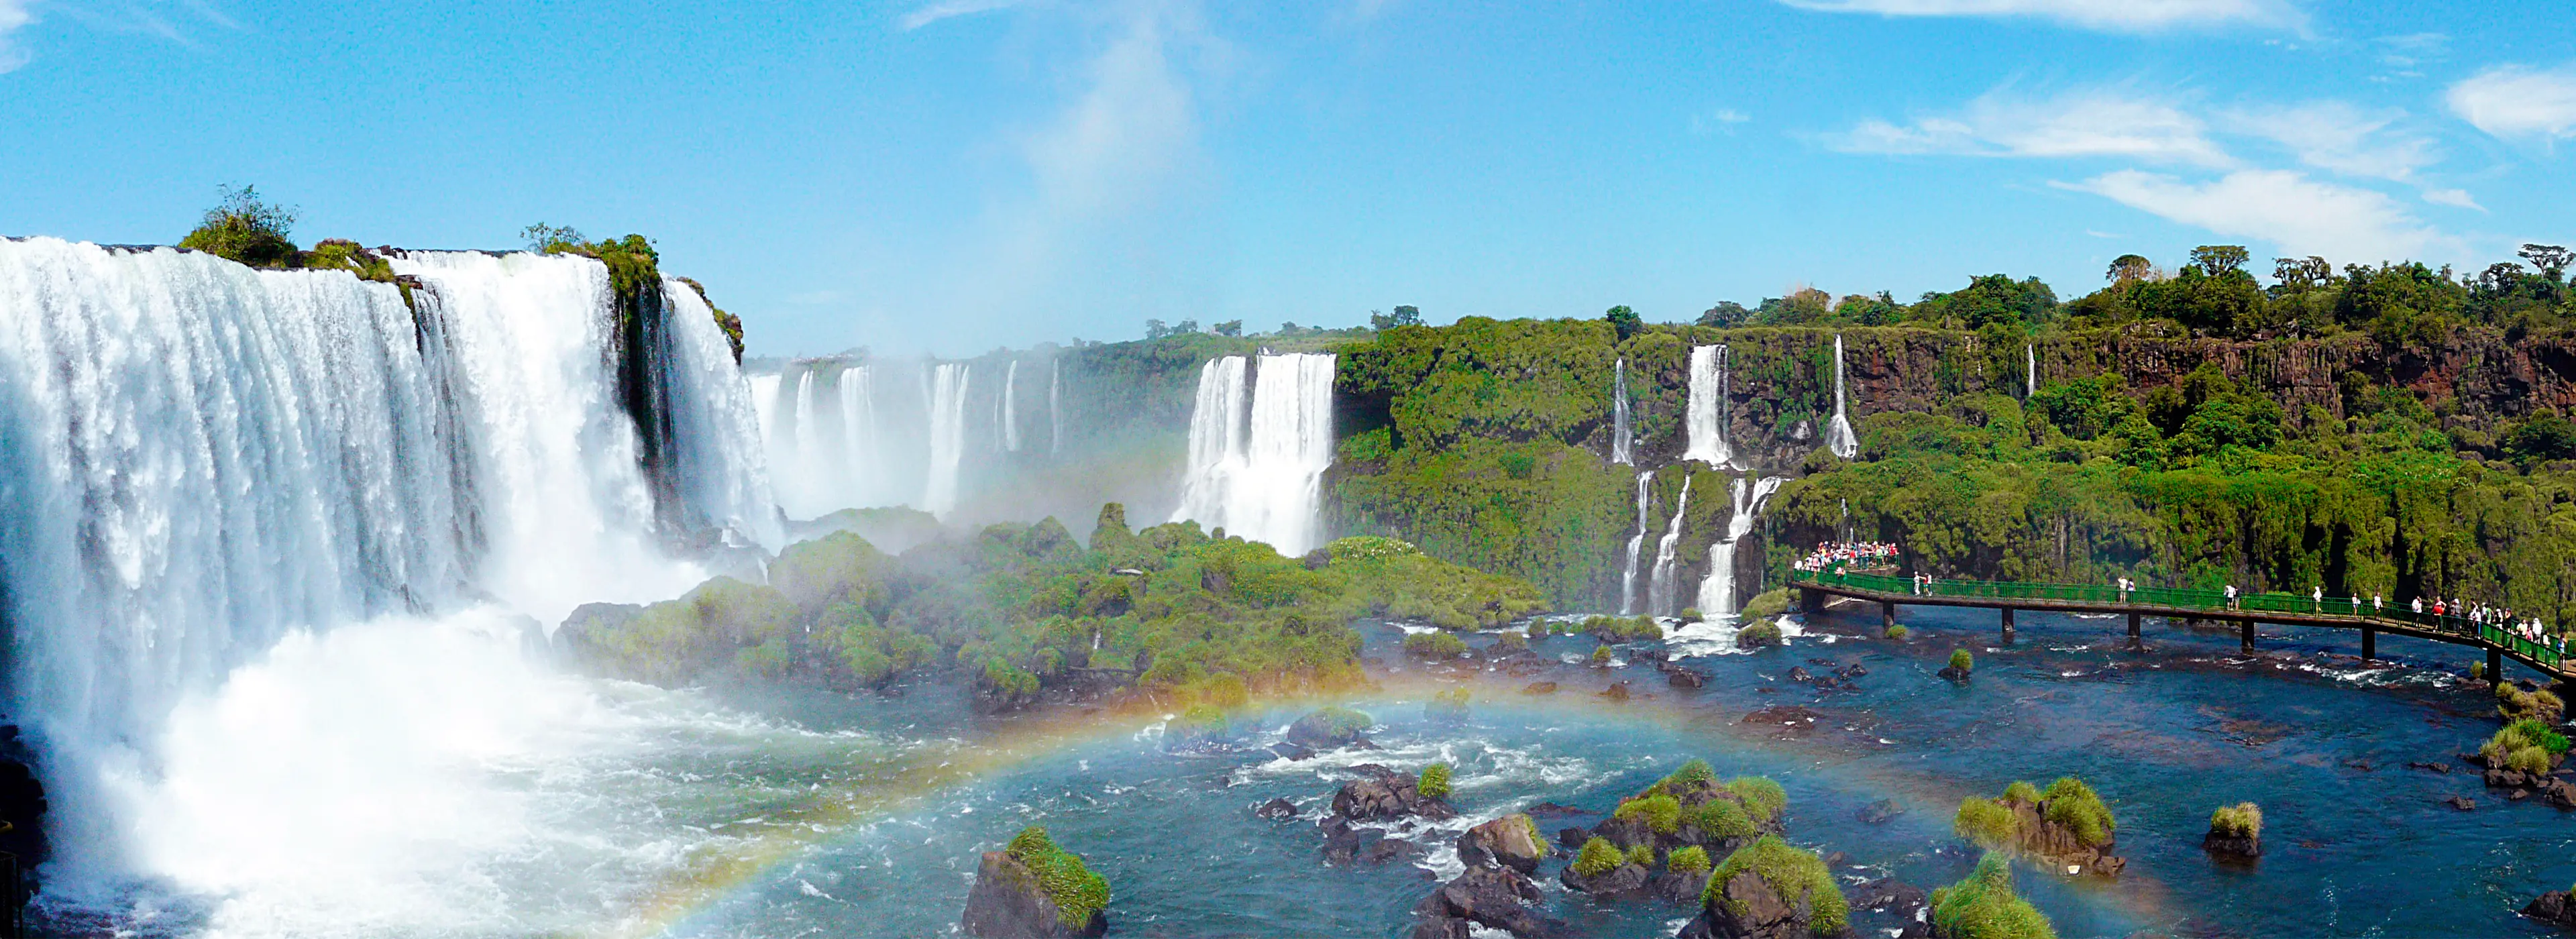 1-Day Solo Local Experience: Outdoor Activities at Iguazu Falls